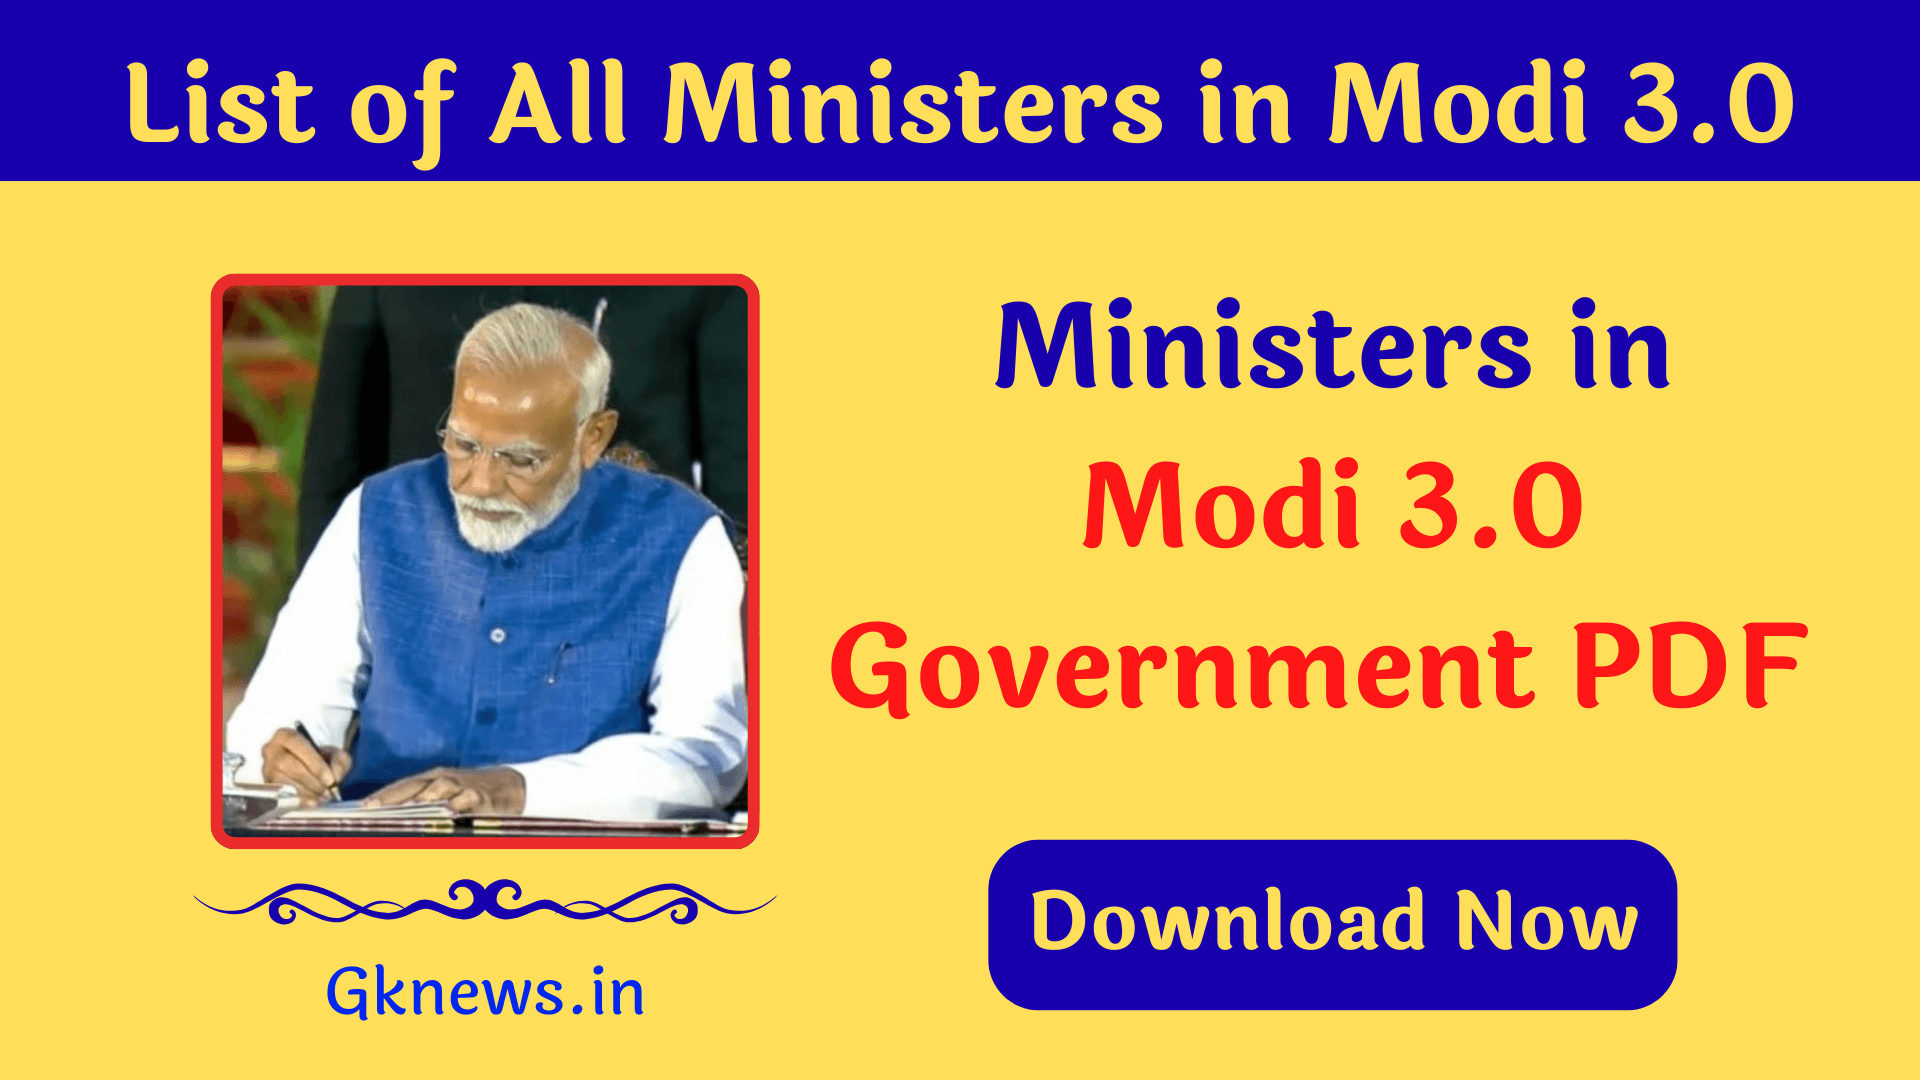 List of All Ministers